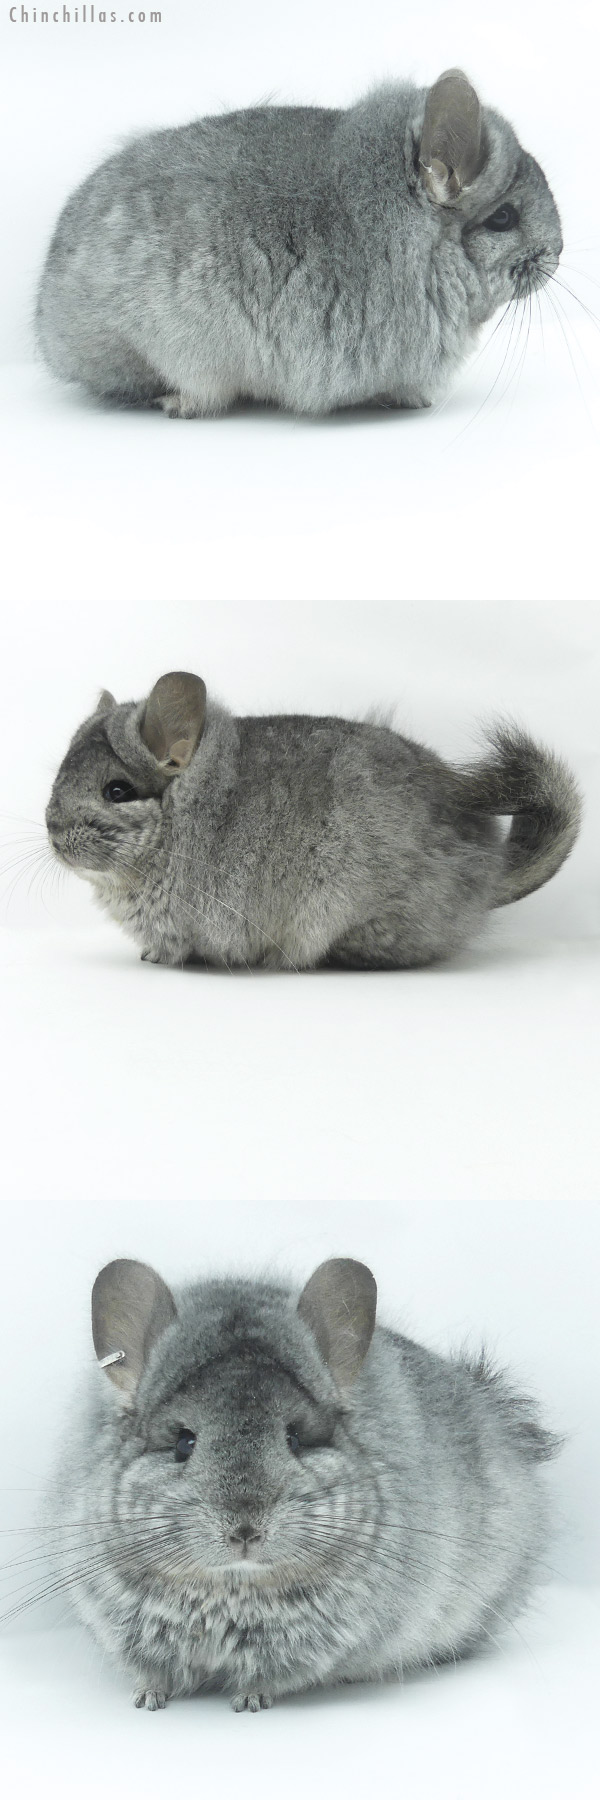 Chinchilla or related item offered for sale or export on Chinchillas.com - 20071 Exceptional Blocky Standard ( Ebony & Locken Carrier )  Royal Persian Angora Female Chinchilla